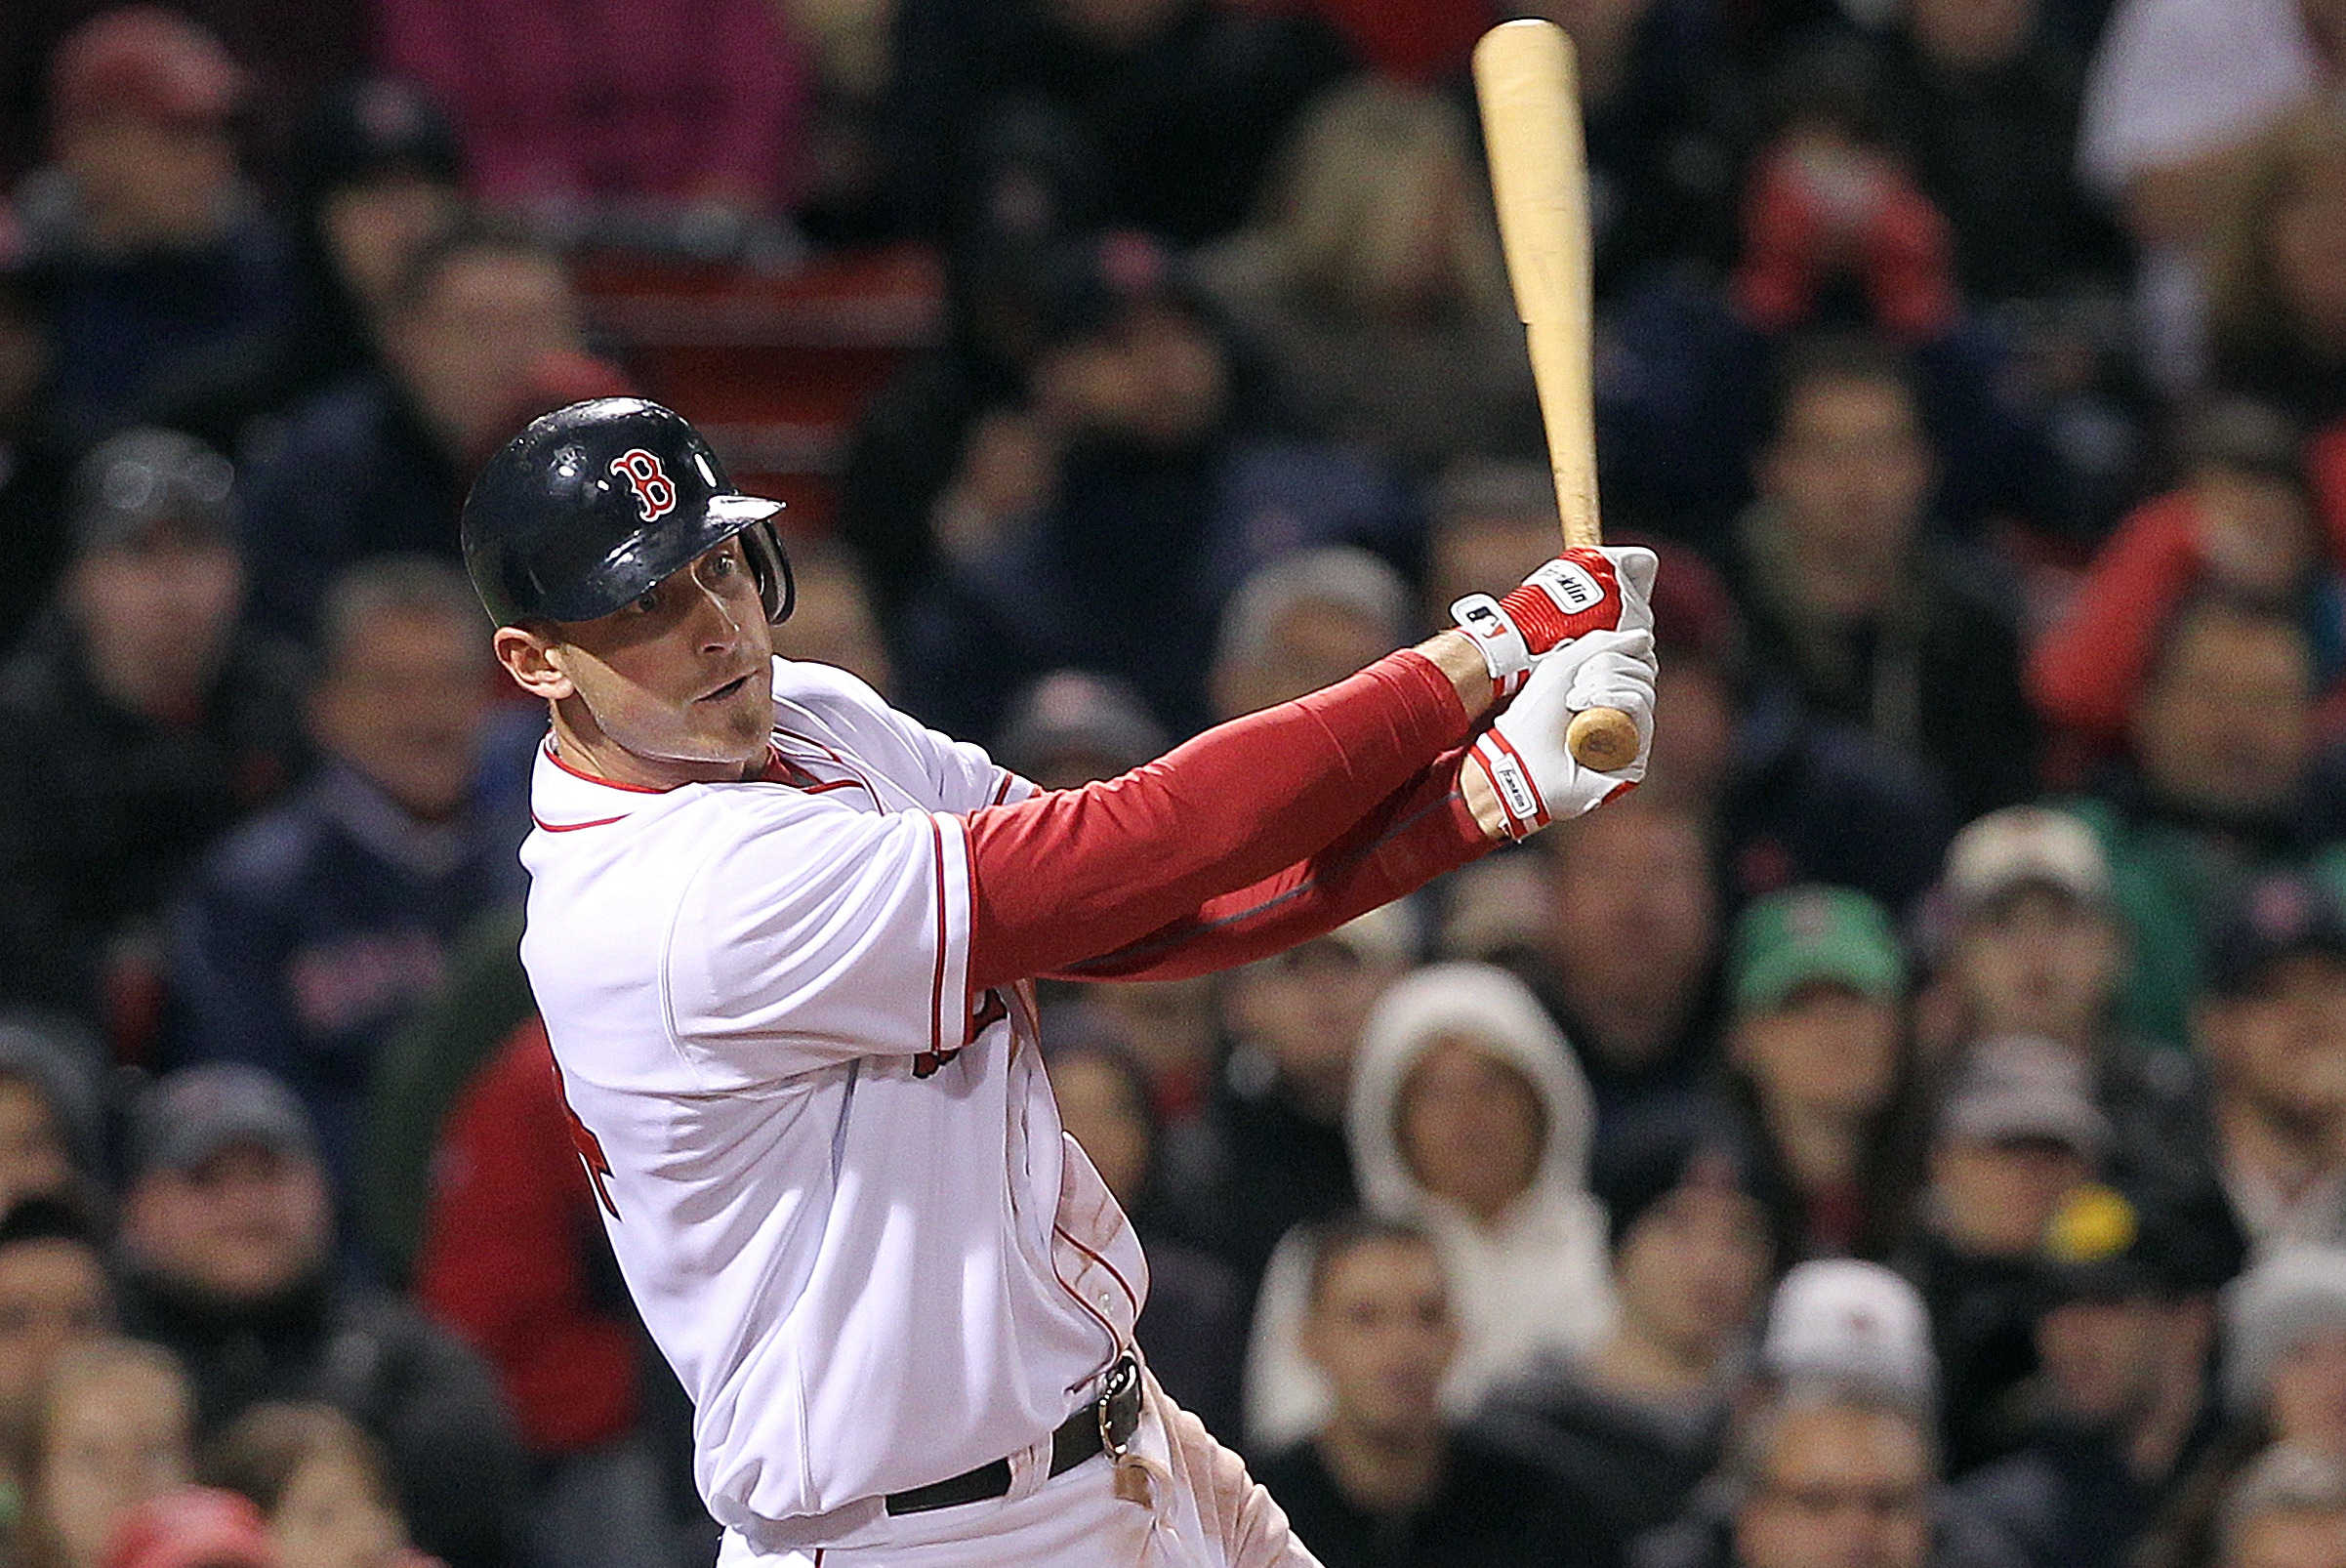 Will Middlebrooks 'Nervous' to Make Major League Debut As Sox